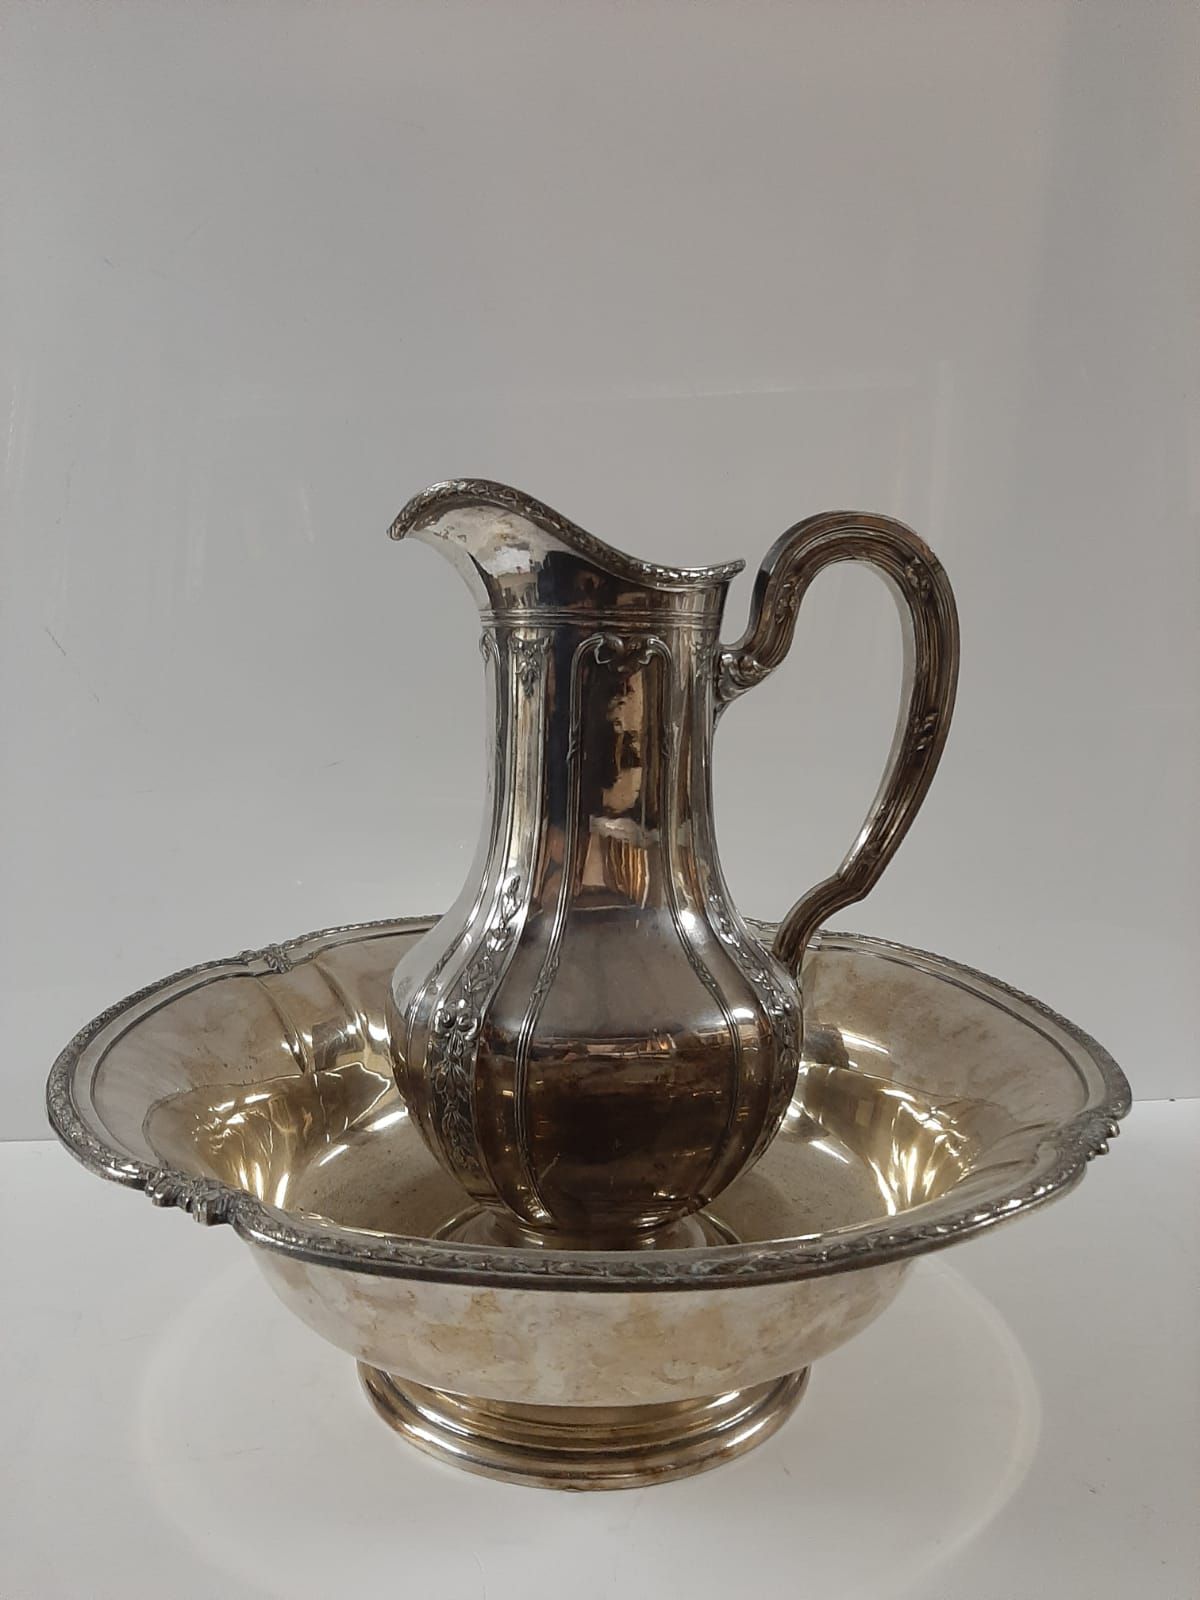 Null GALLIA

Ewer in silver plated metal, the body decorated with foliage, the n&hellip;